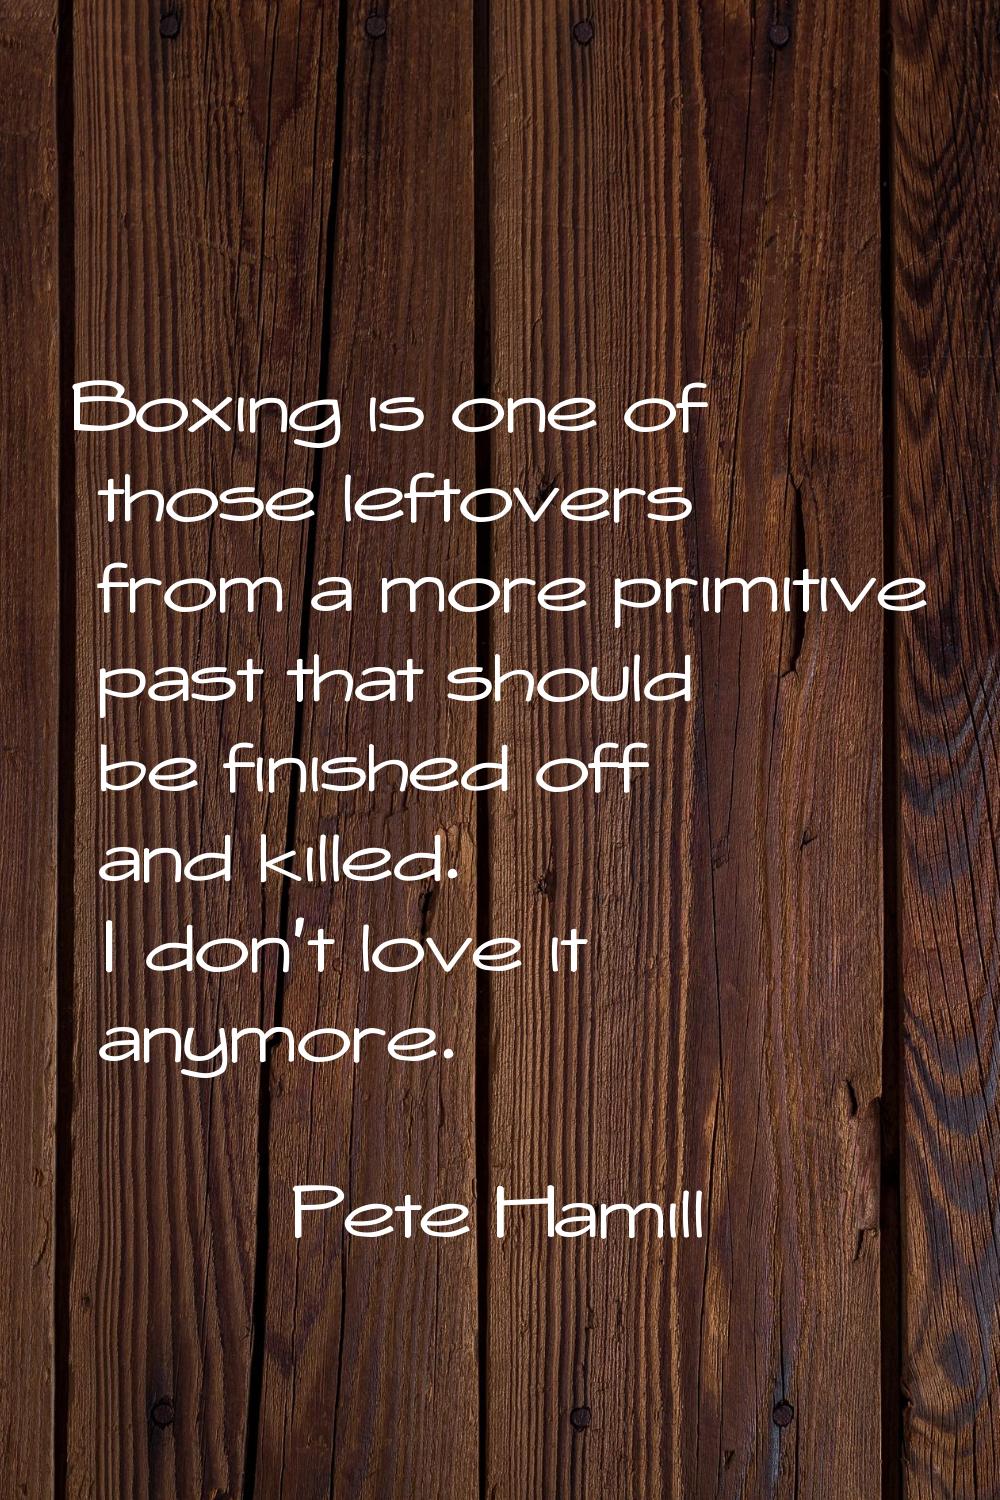 Boxing is one of those leftovers from a more primitive past that should be finished off and killed.